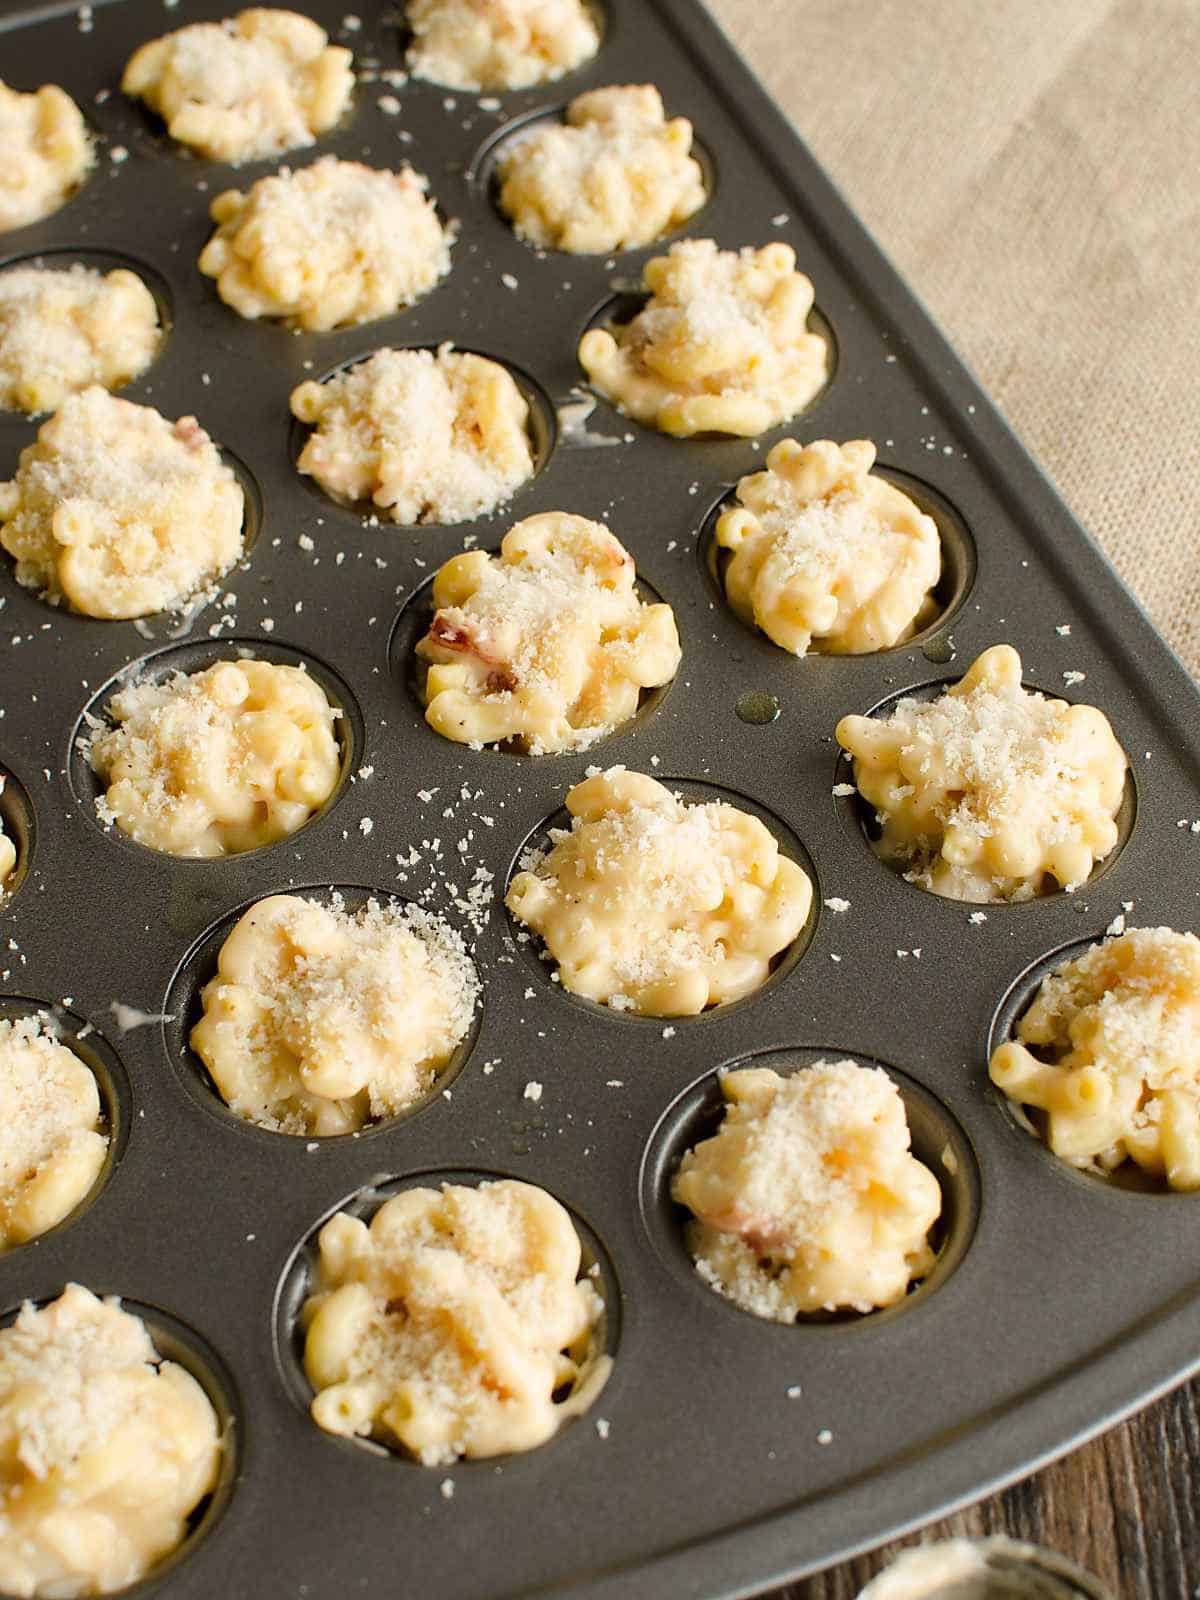 small portions of mac and cheese in a mini muffin tin with breadcrumbs sprinkled over the top prior to baking.